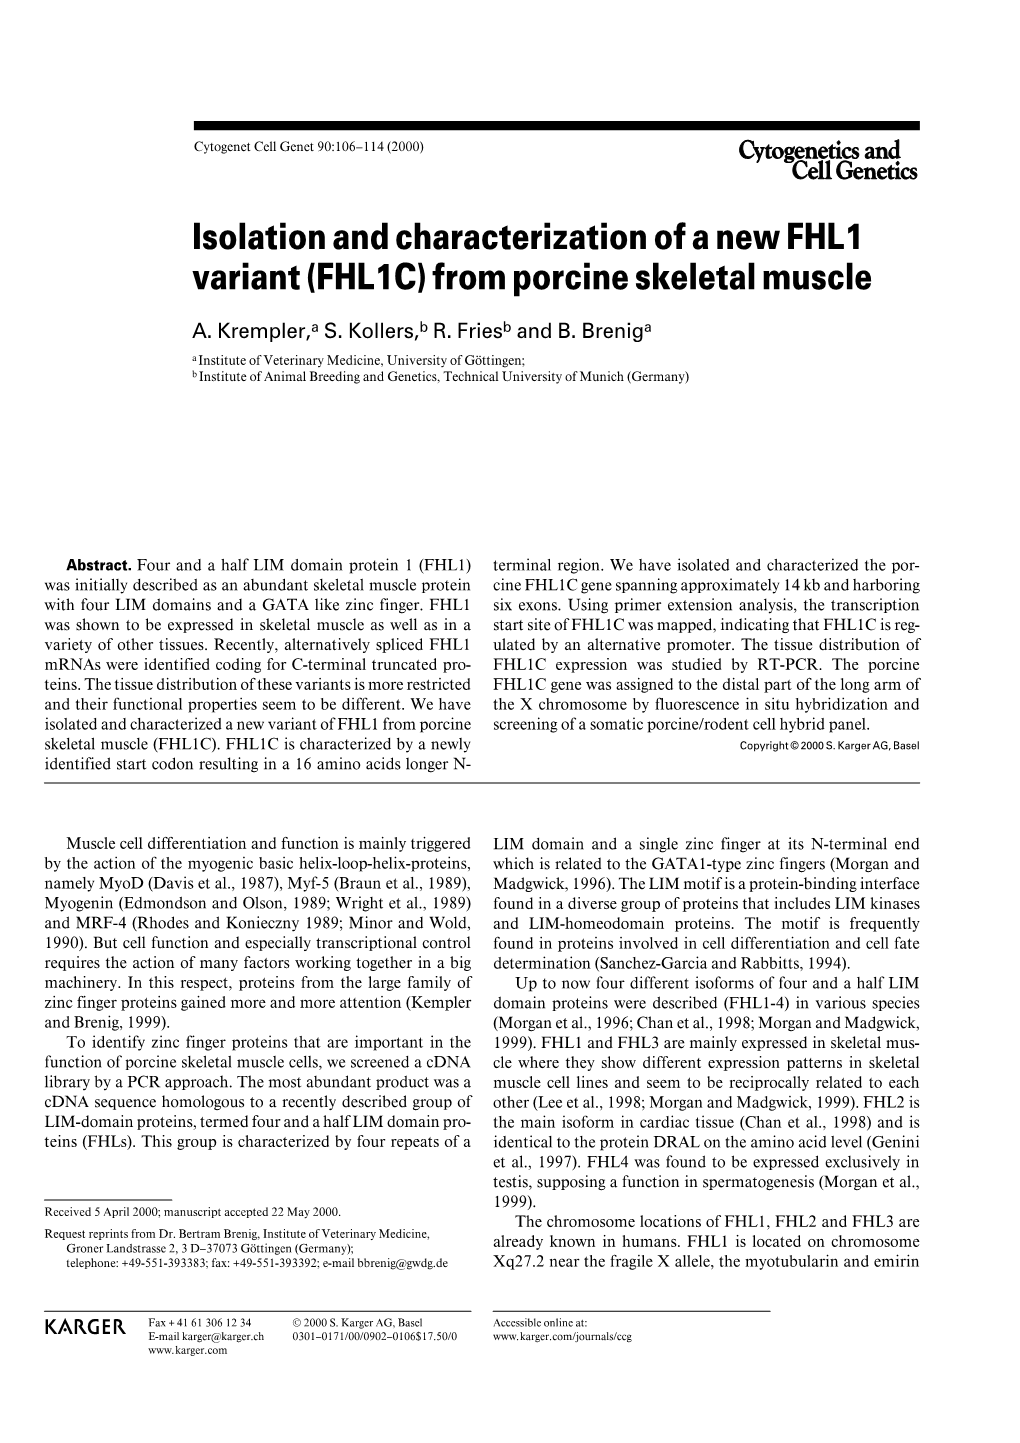 Isolation and Characterization of a New FHL1 Variant (FHL1C) from Porcine Skeletal Muscle